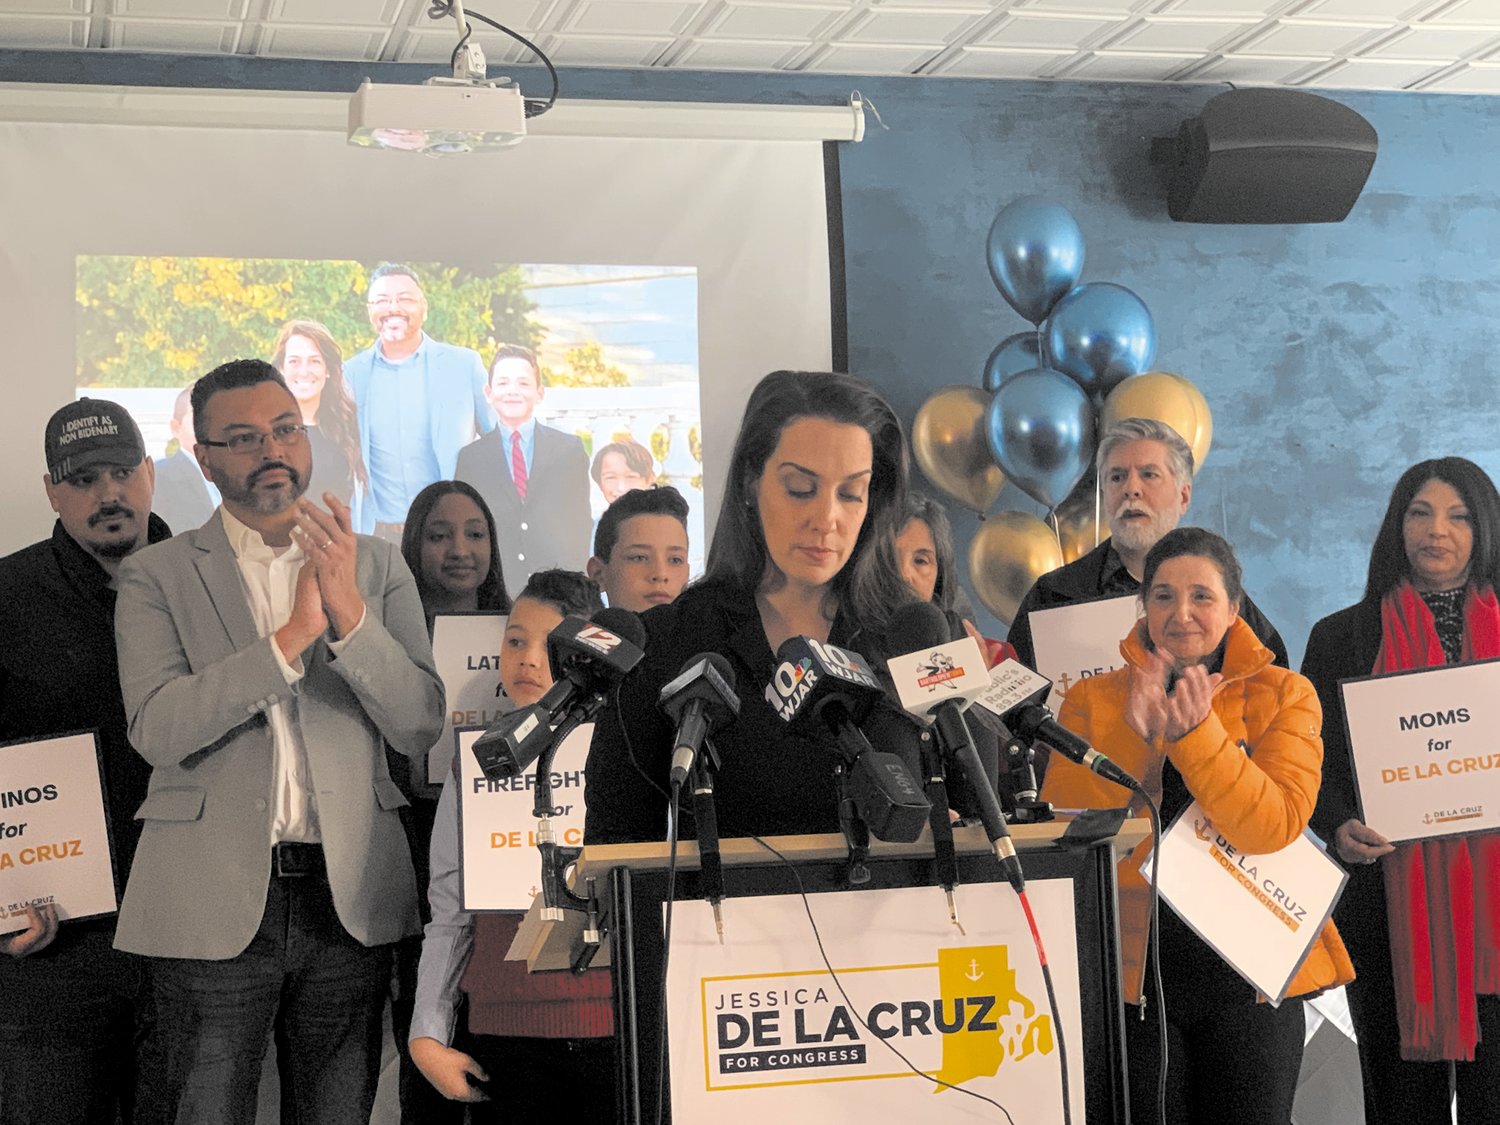 CHEERING HER ON: Jessica de la Cruz held her second congressional district campaign kickoff Wednesday morning at 39 West in Cranston. (Warwick Beacon photo)